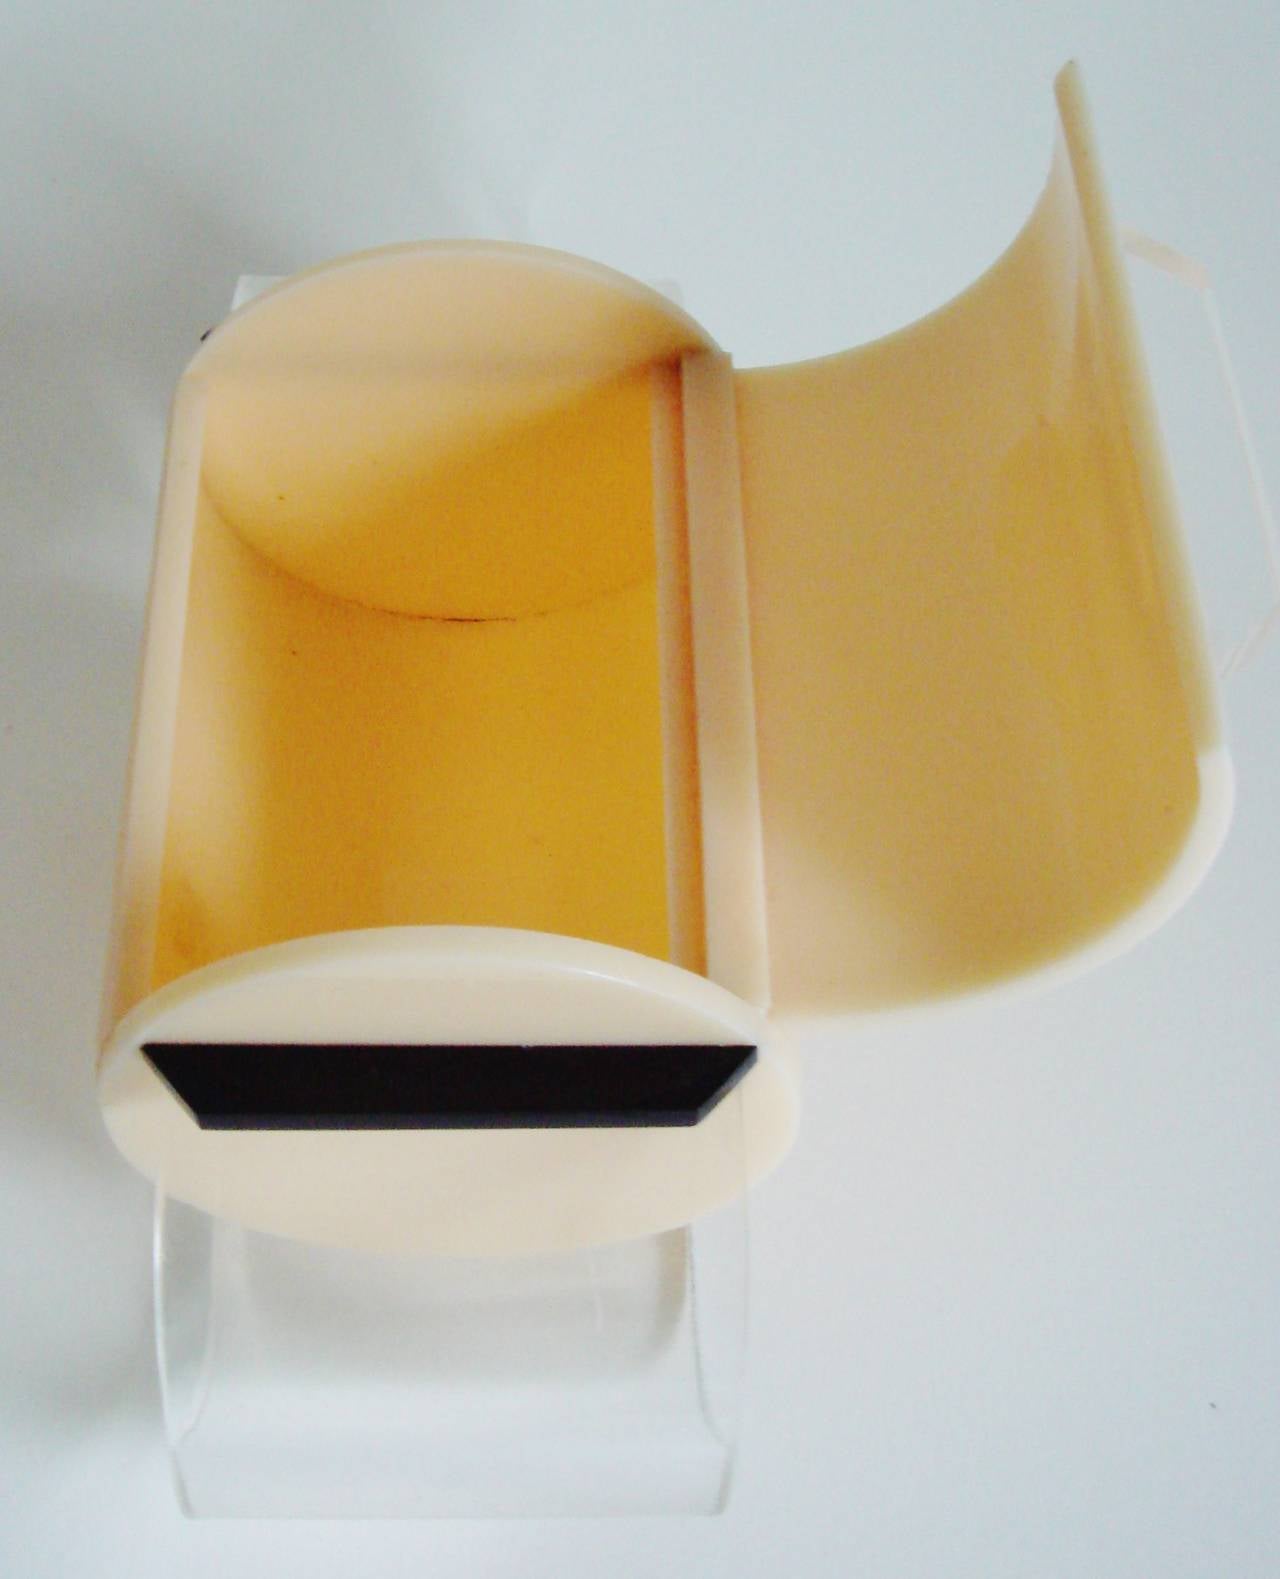 Great Britain (UK) Rare English Art Deco Vanity Box in Peach, Black and Clear Lucite For Sale